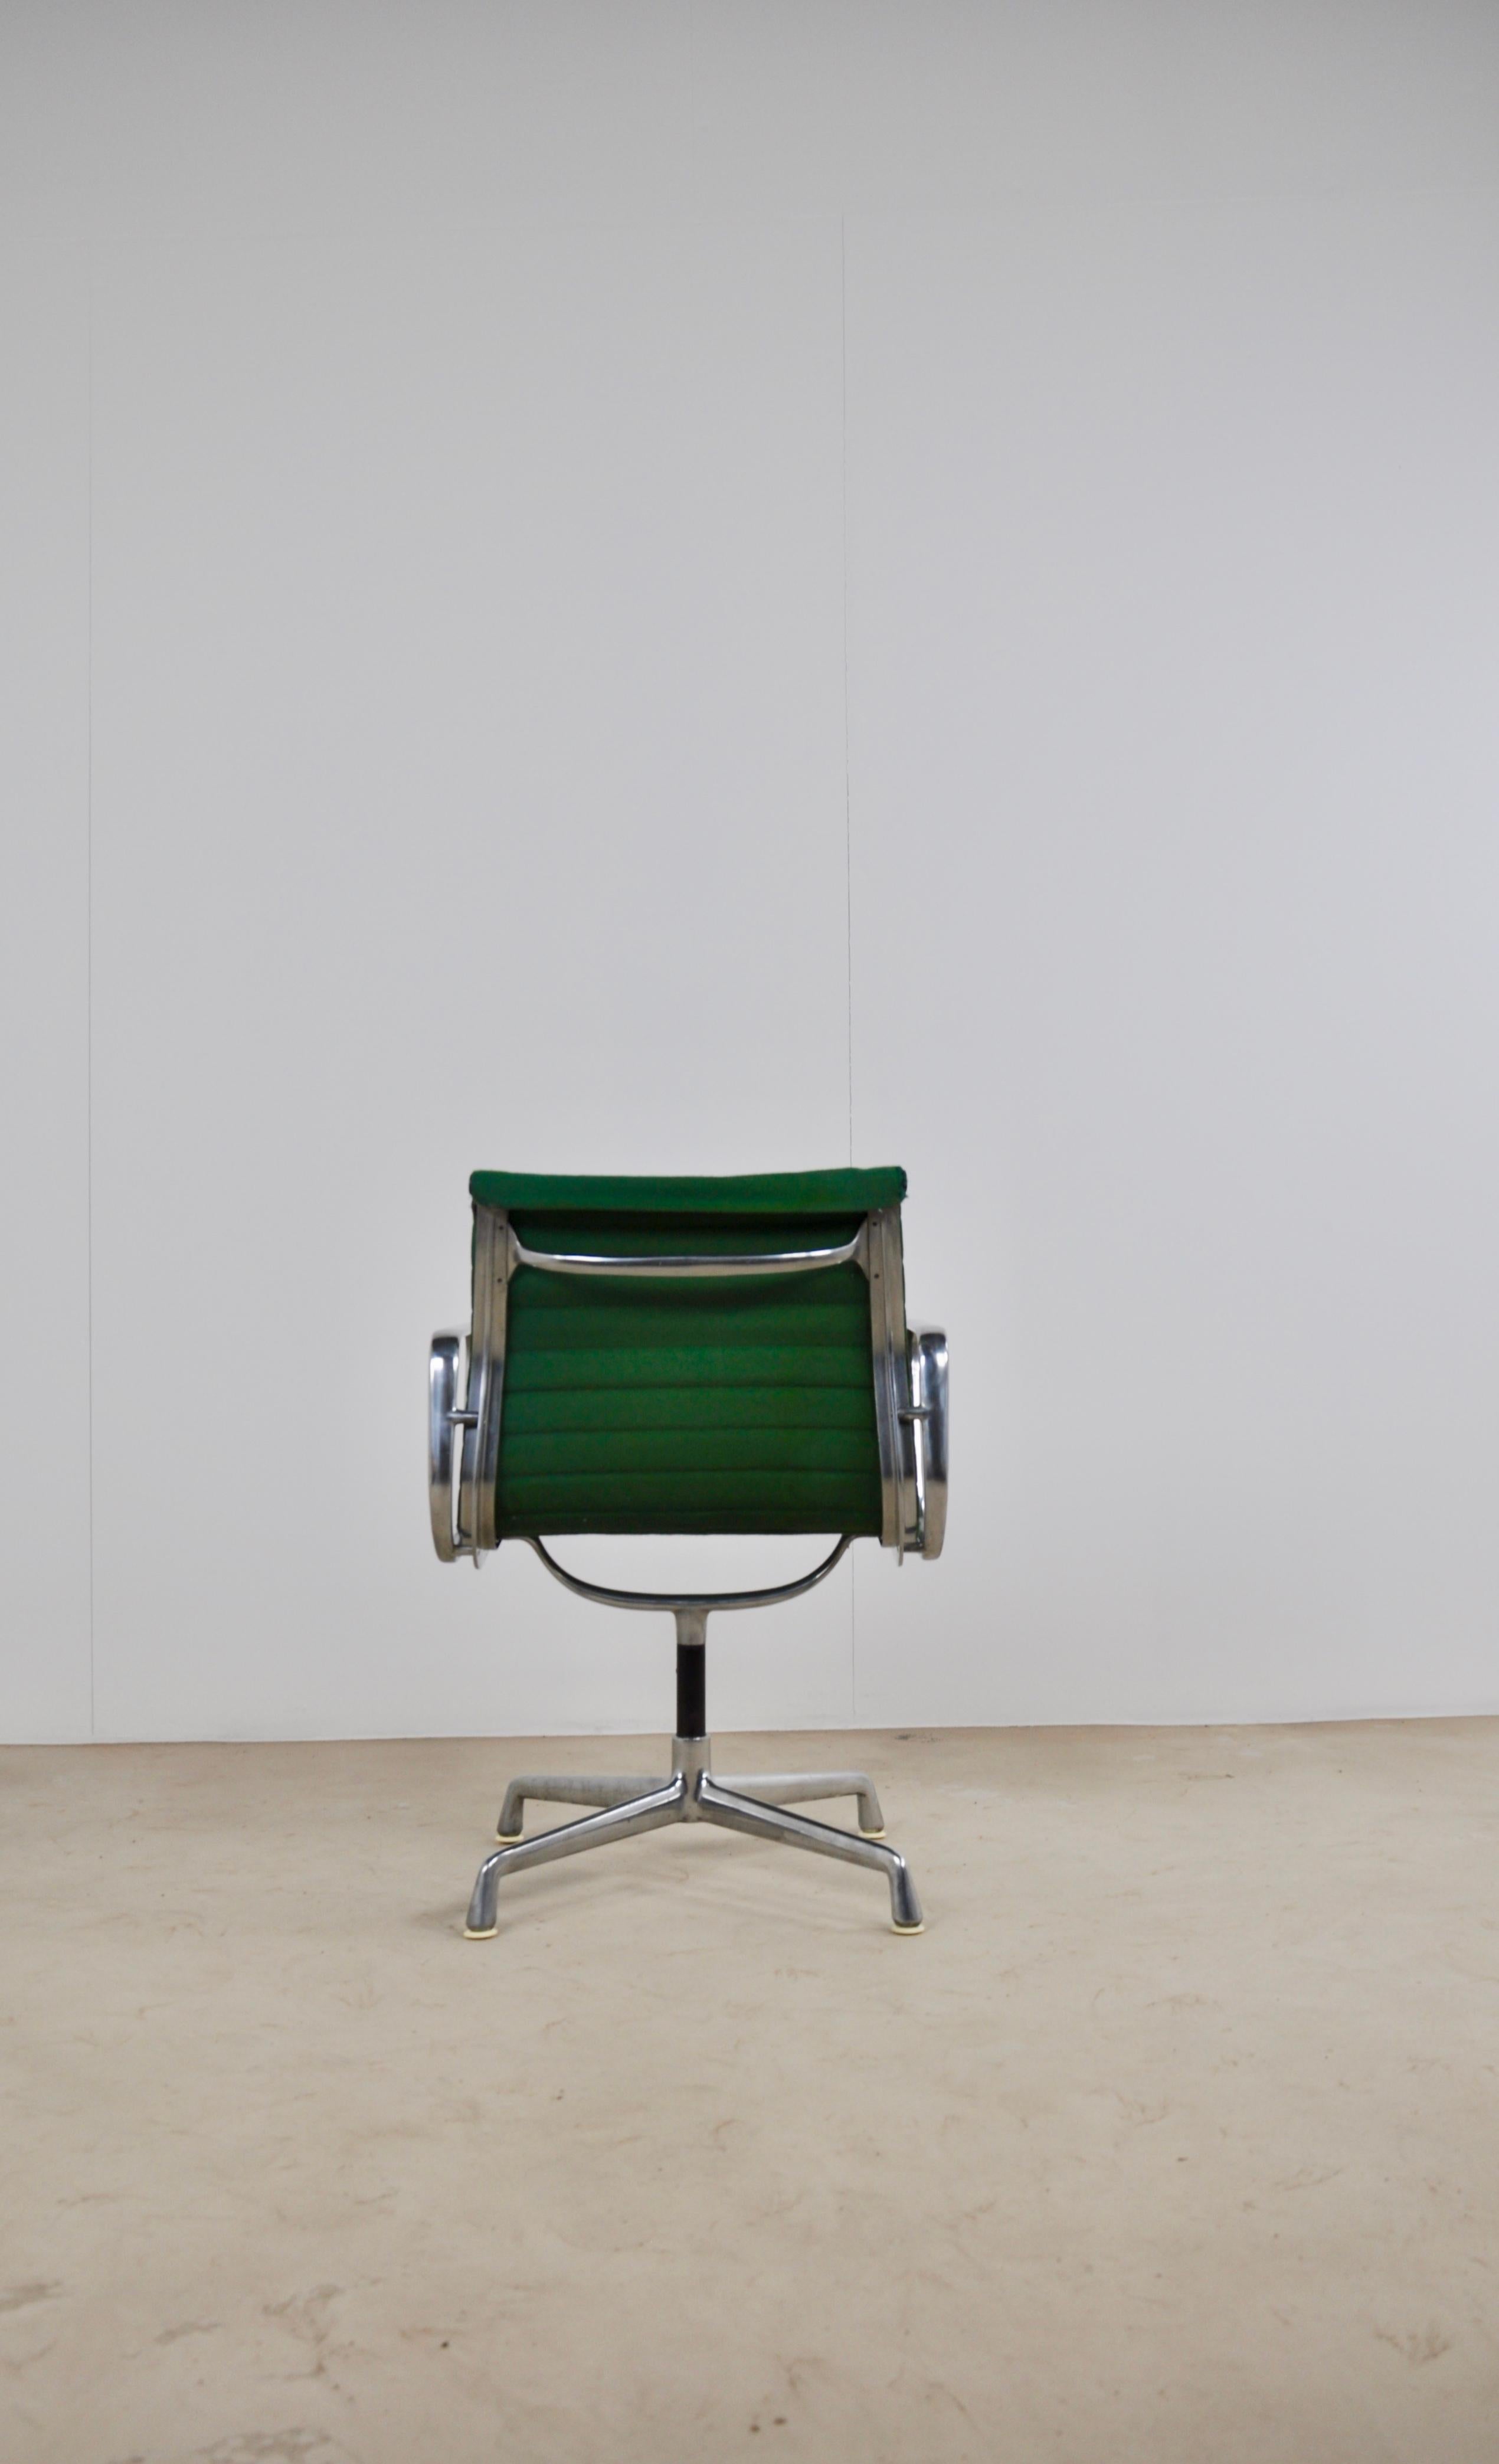 Italian Green Office Armchair by Charles &Ray Eames for Herman Miller ICF, 1960s